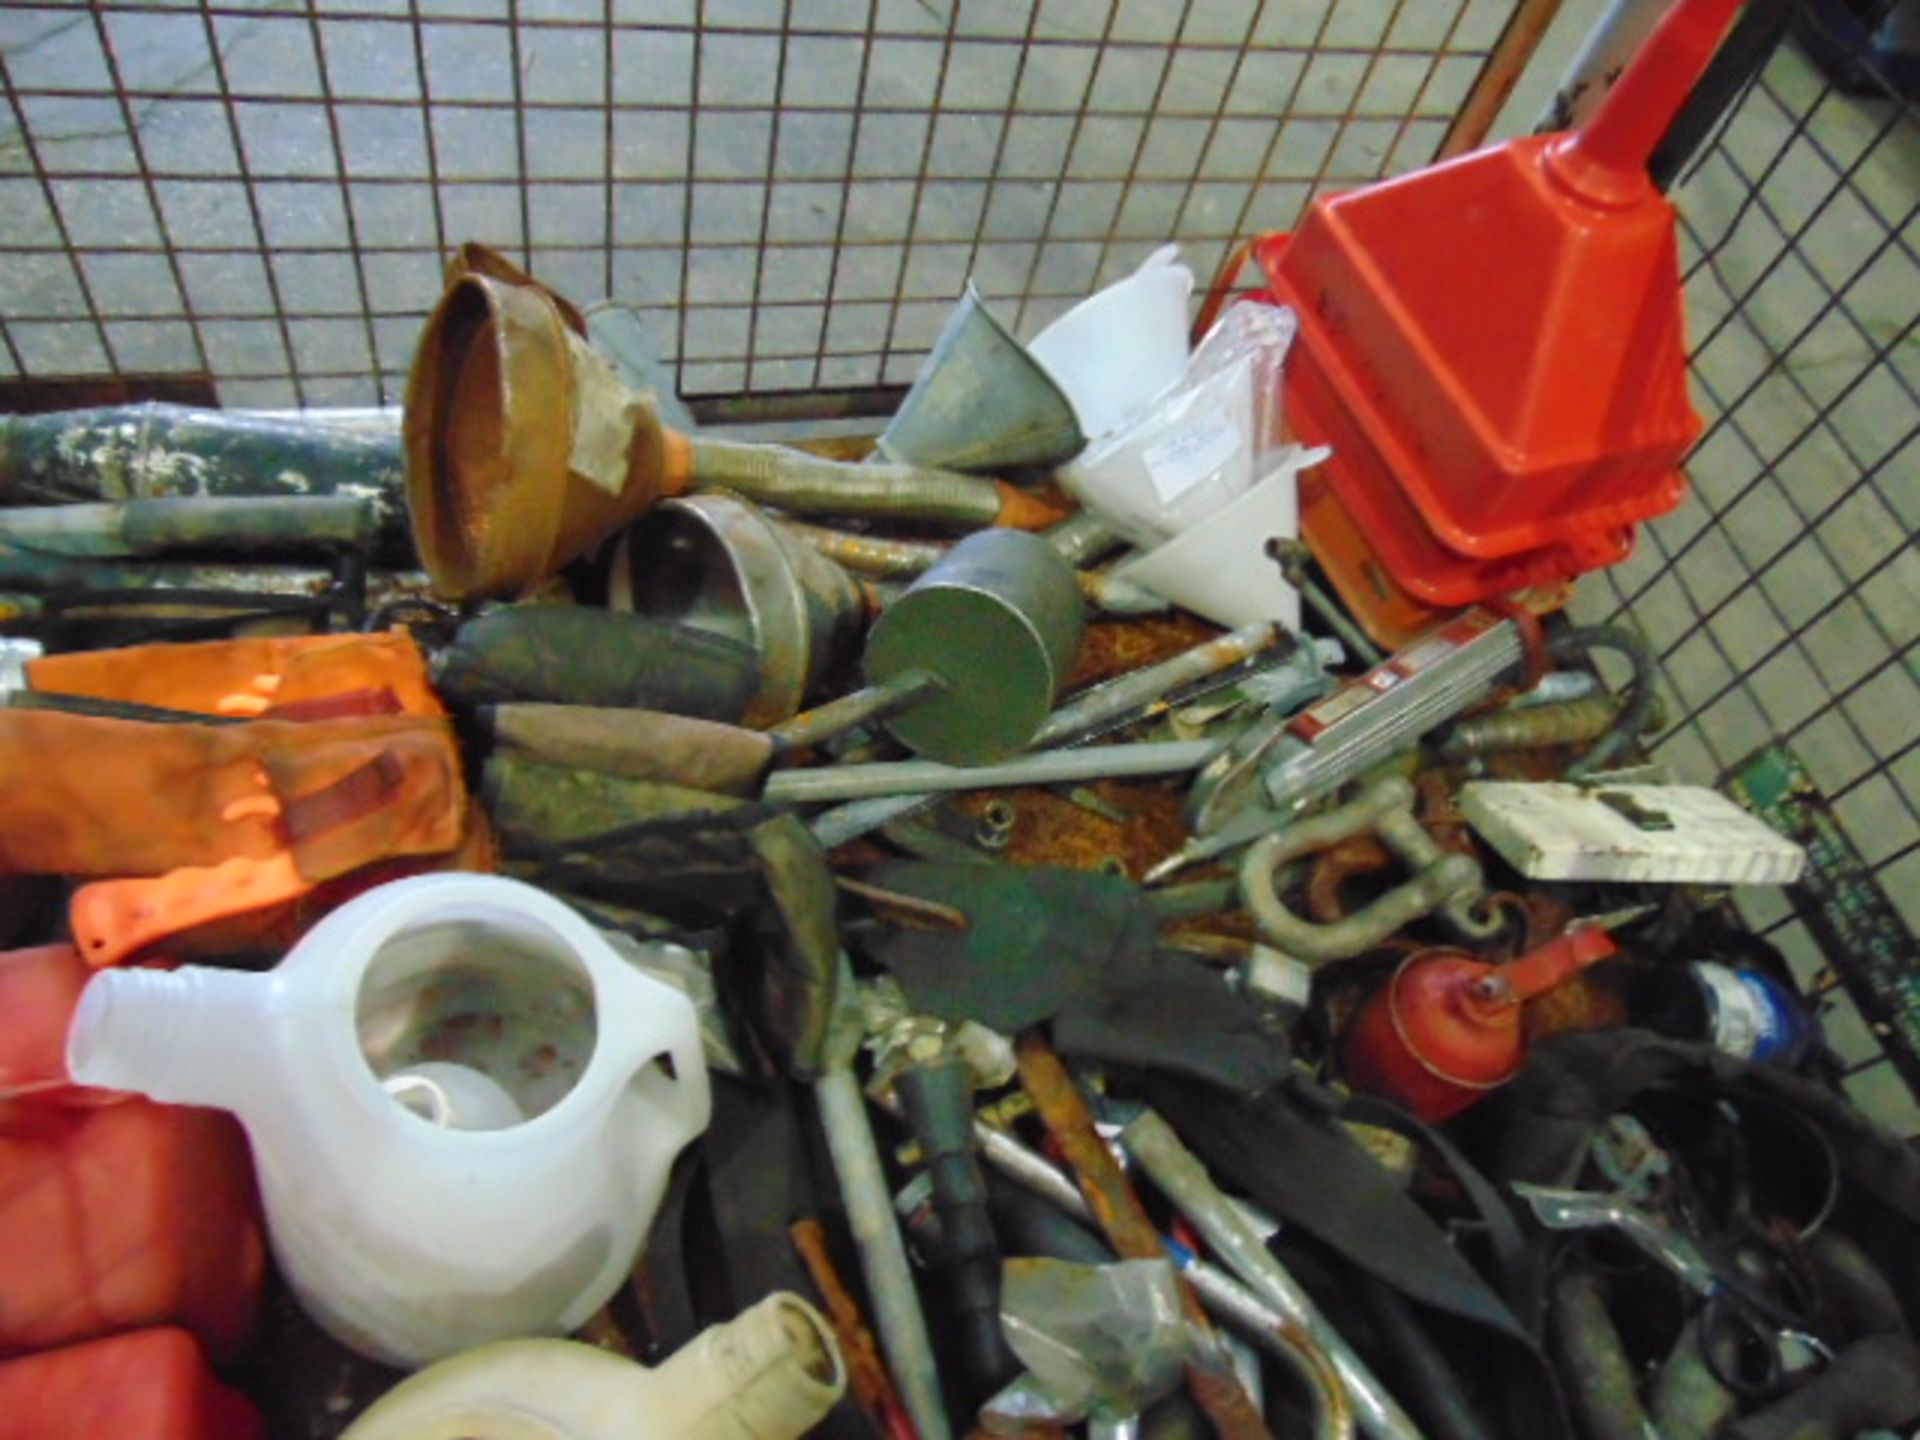 Stillage of Workshop Tools and Accessories - Image 4 of 4